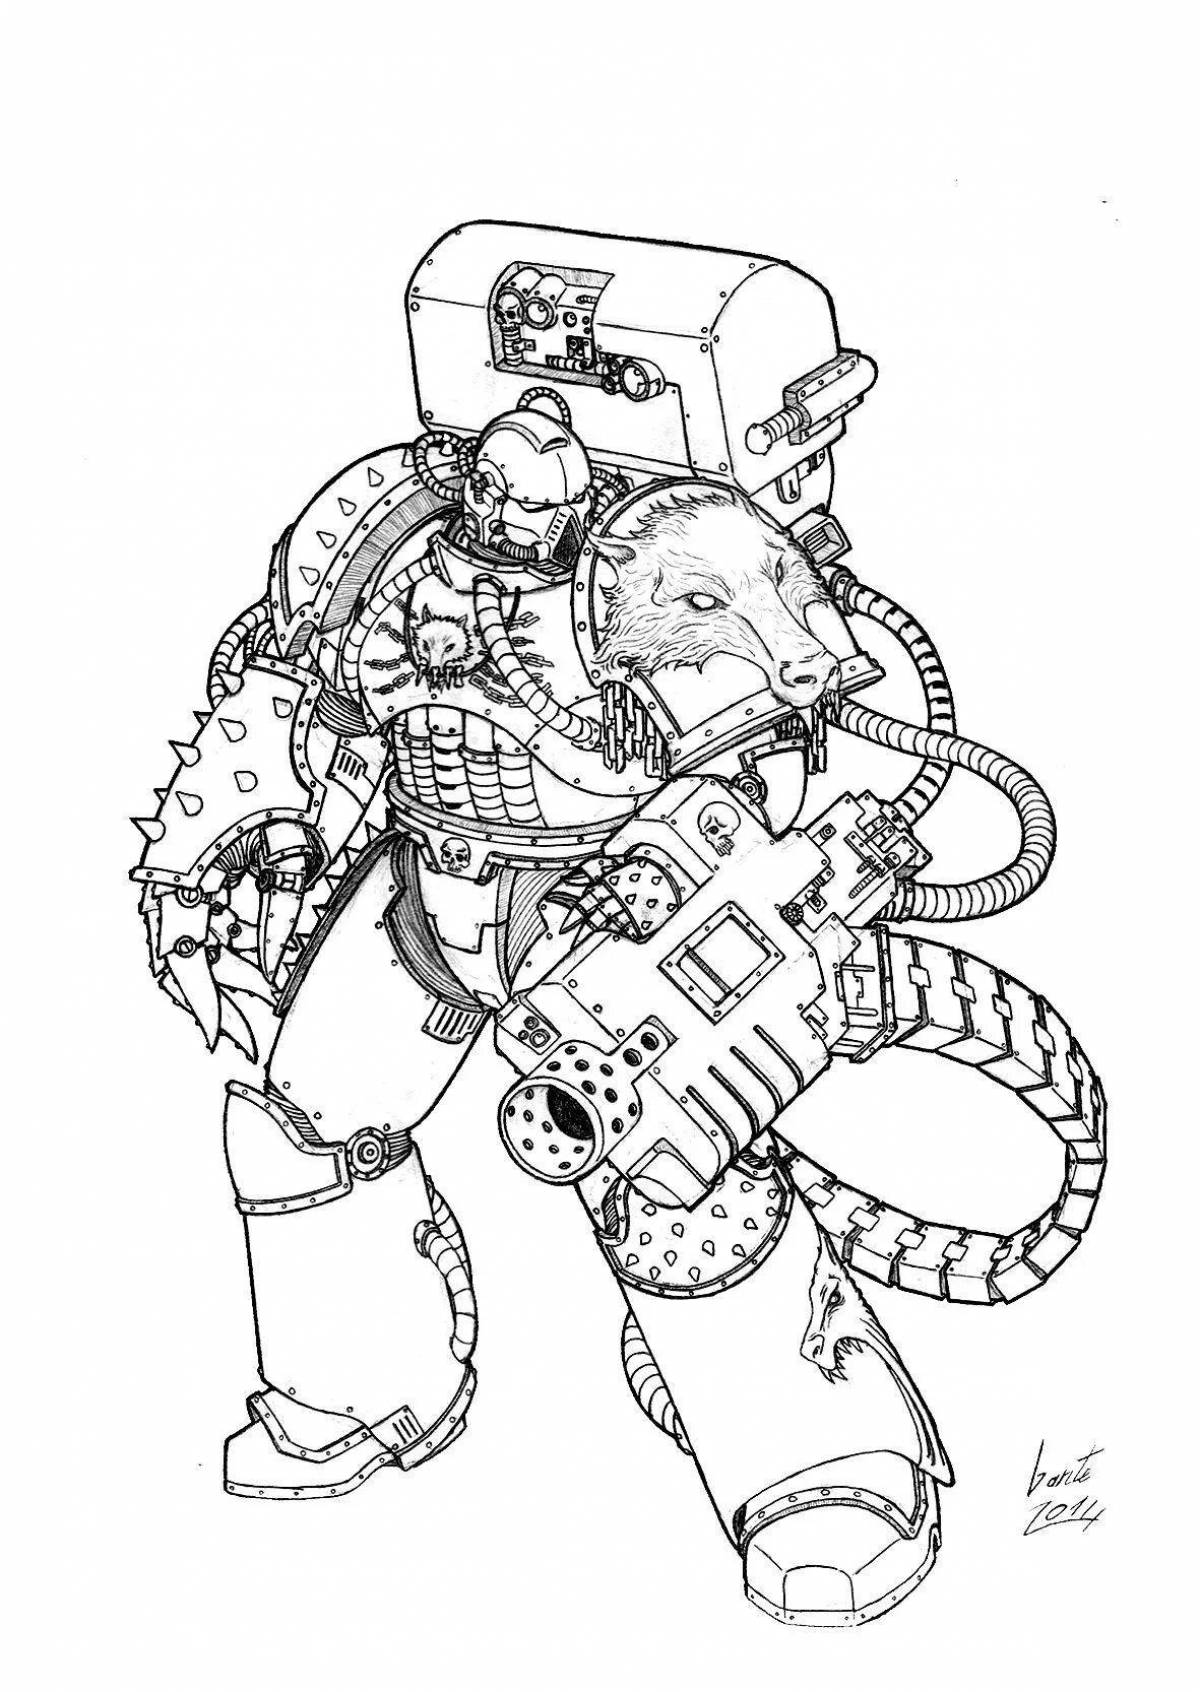 Colorful warhammer coloring page